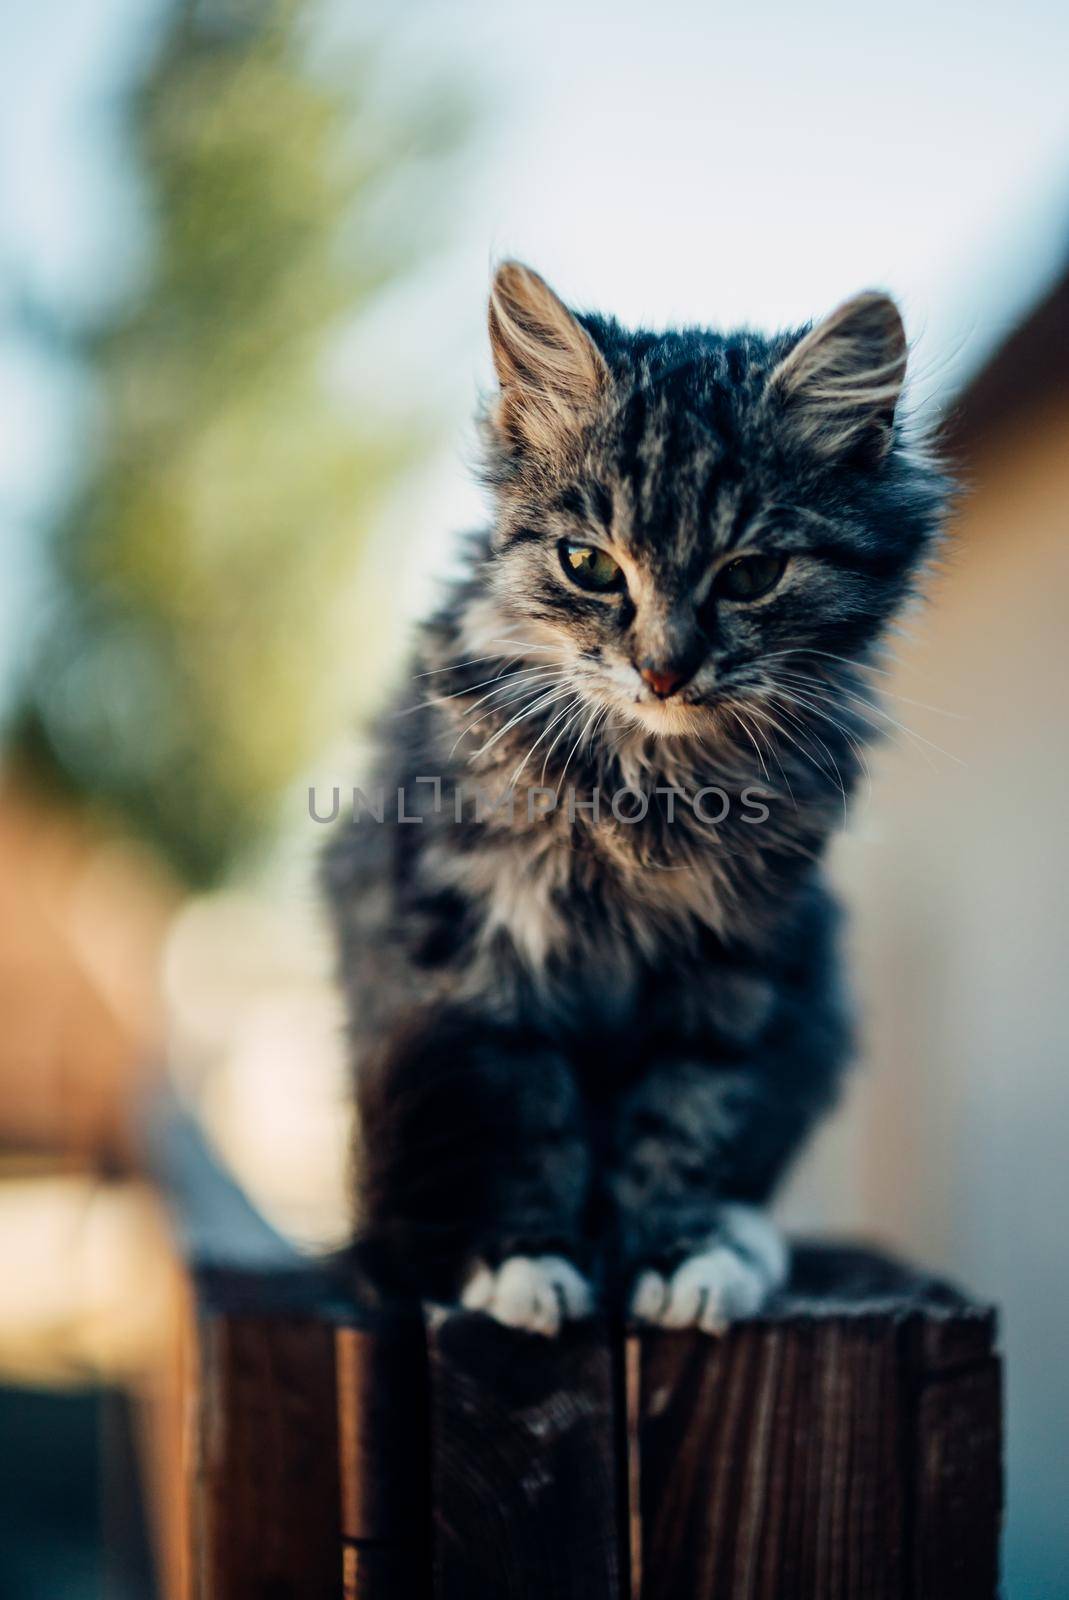 kitten on the fence/a gray little kitten was scared to climb the fence by mosfet_ua